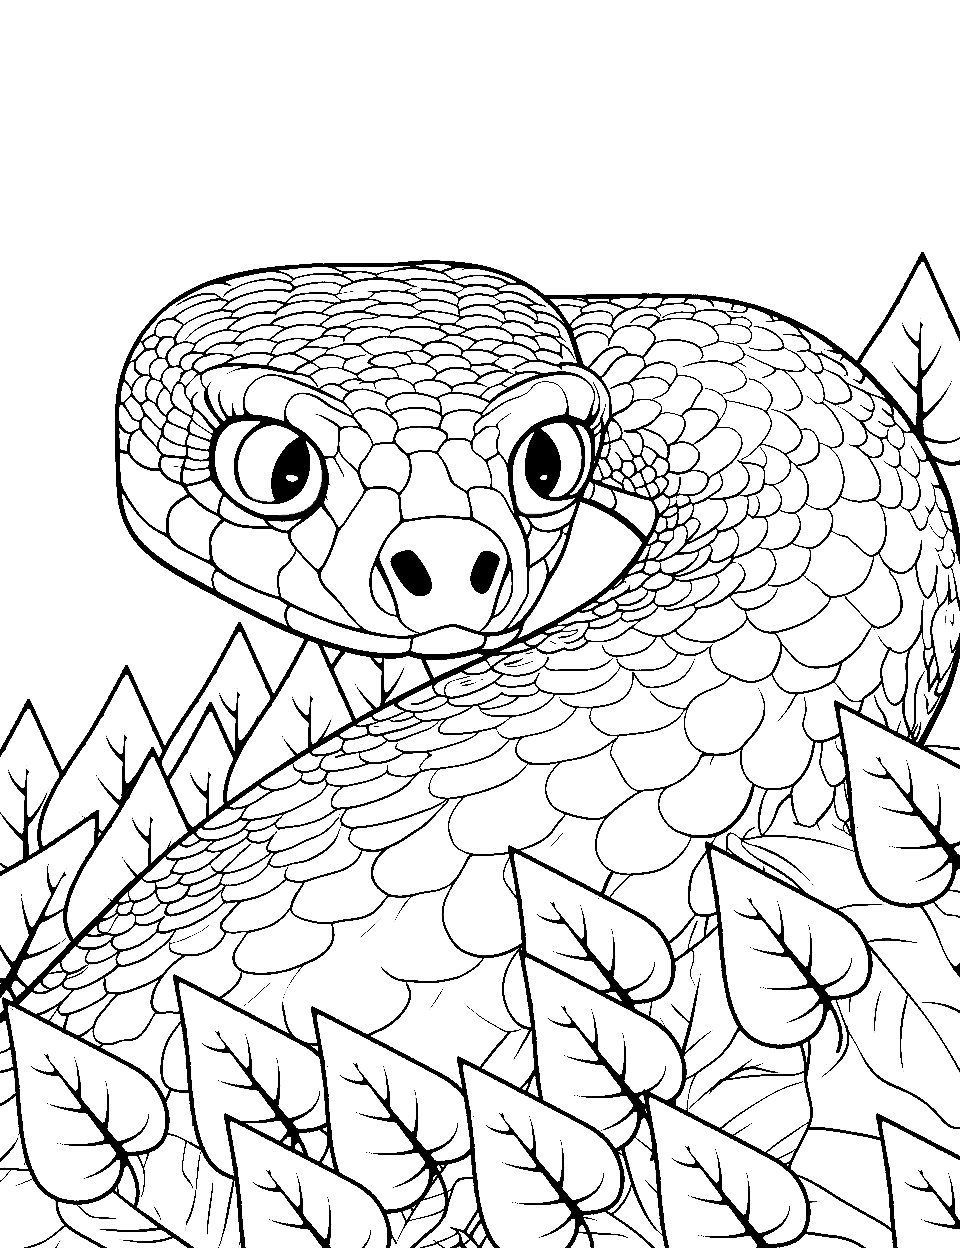 Hiding Under Leaves Coloring Page - A detailed snake hiding under Leaves.